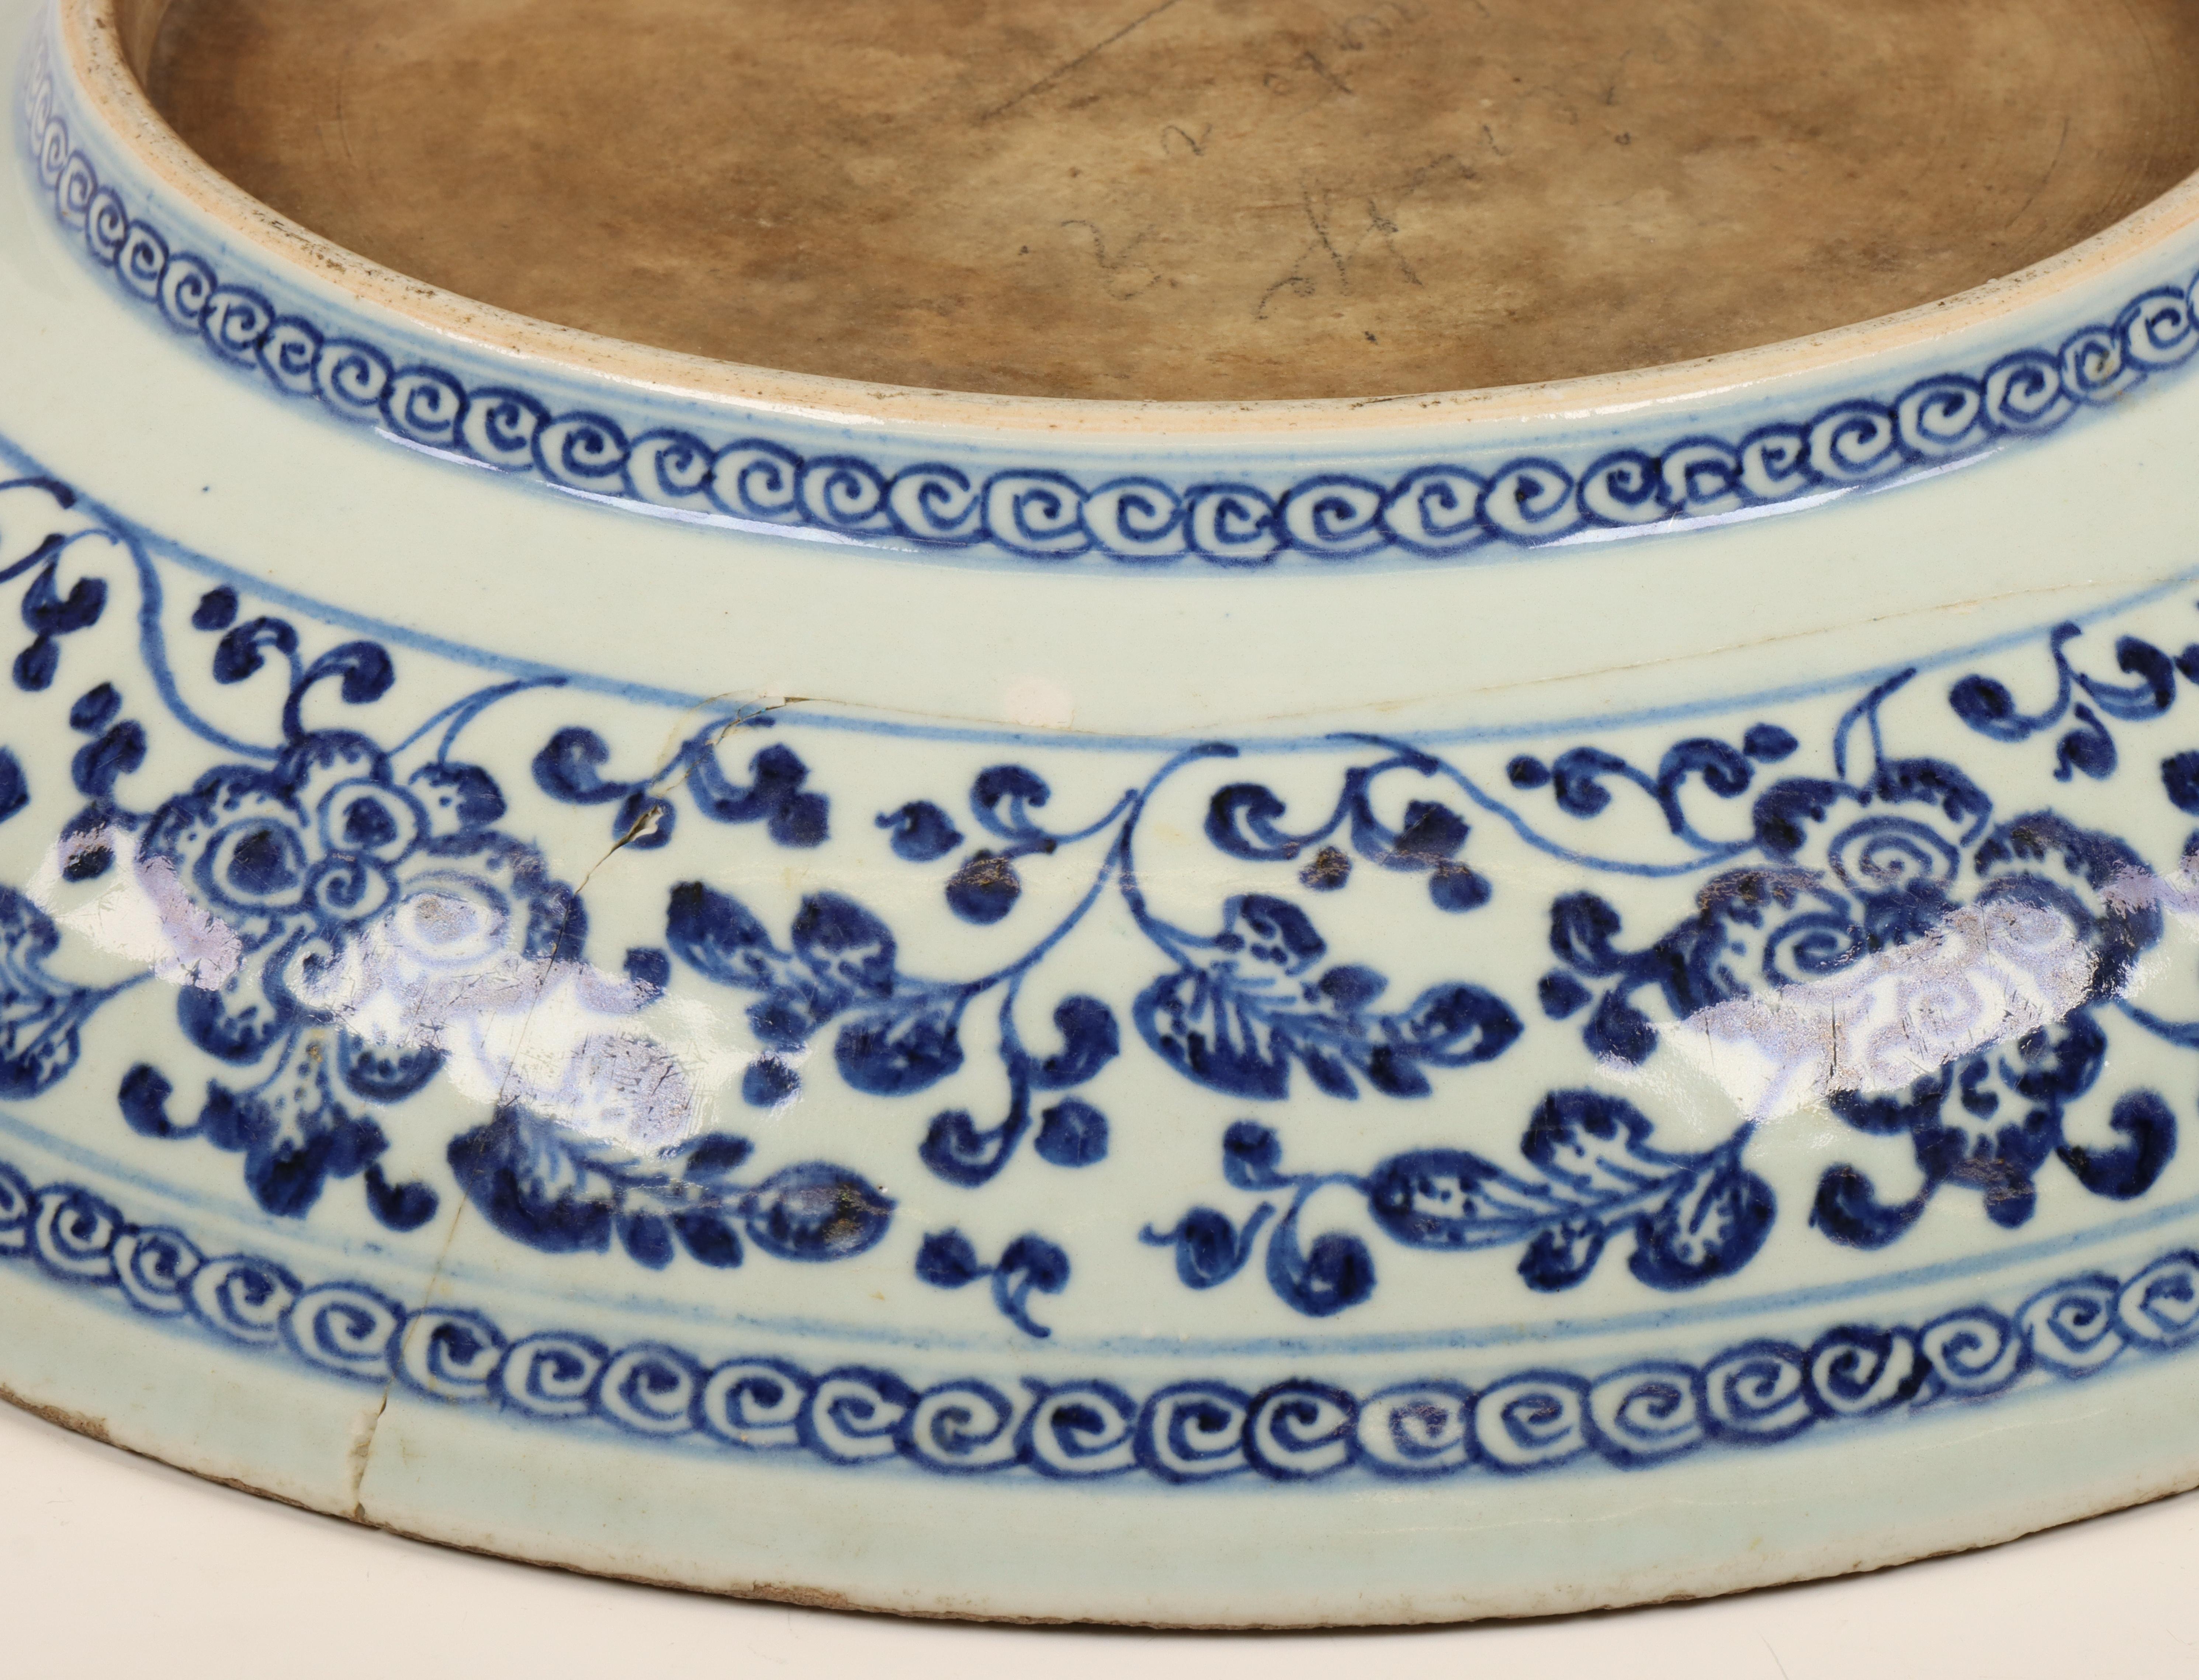 China, blue and white porcelain 'lotus' dish, late Qing dynasty (1644-1912), - Image 2 of 3